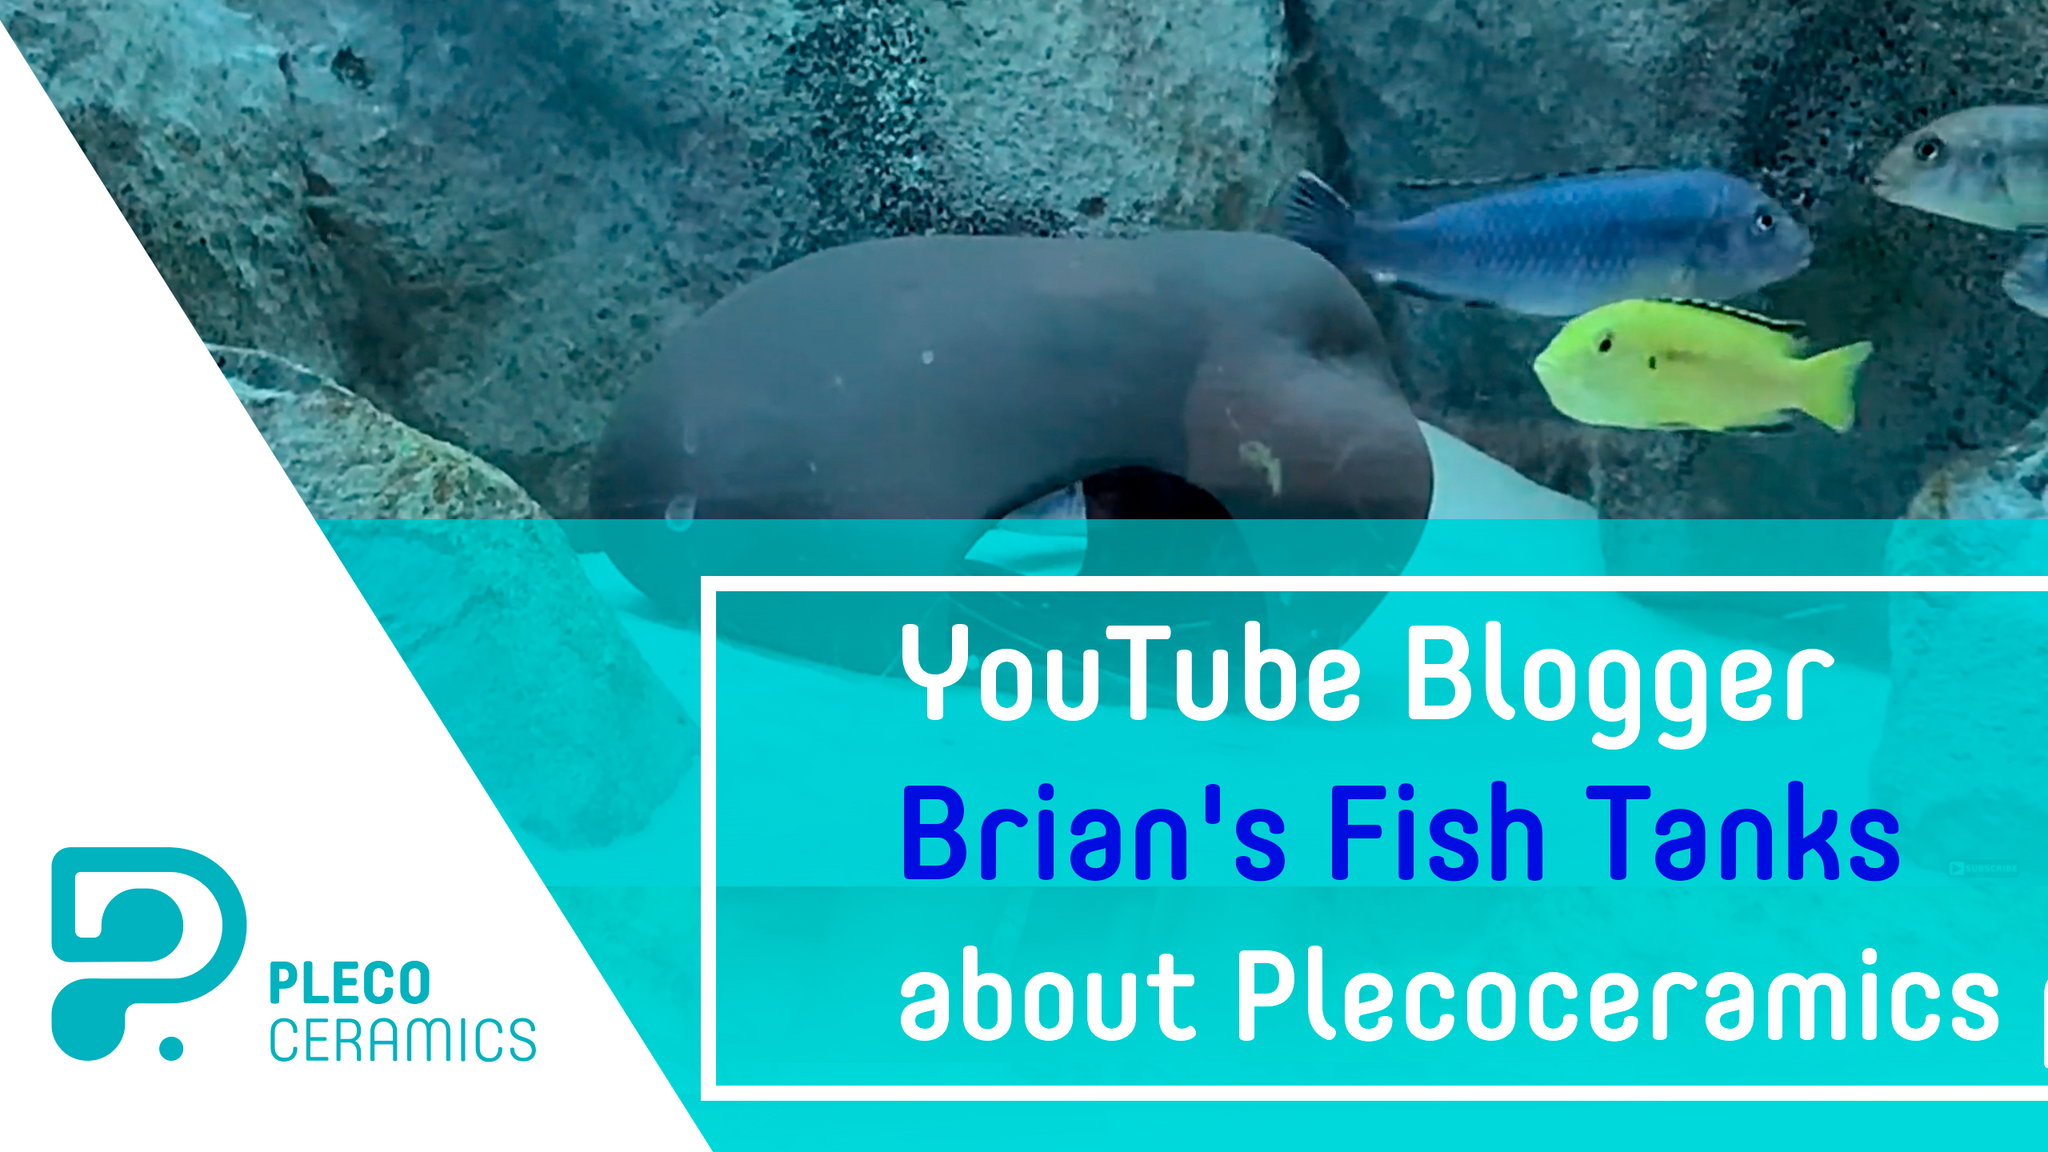 YouTube Blogger Brian's Fish Tanks about Plecoceramics products